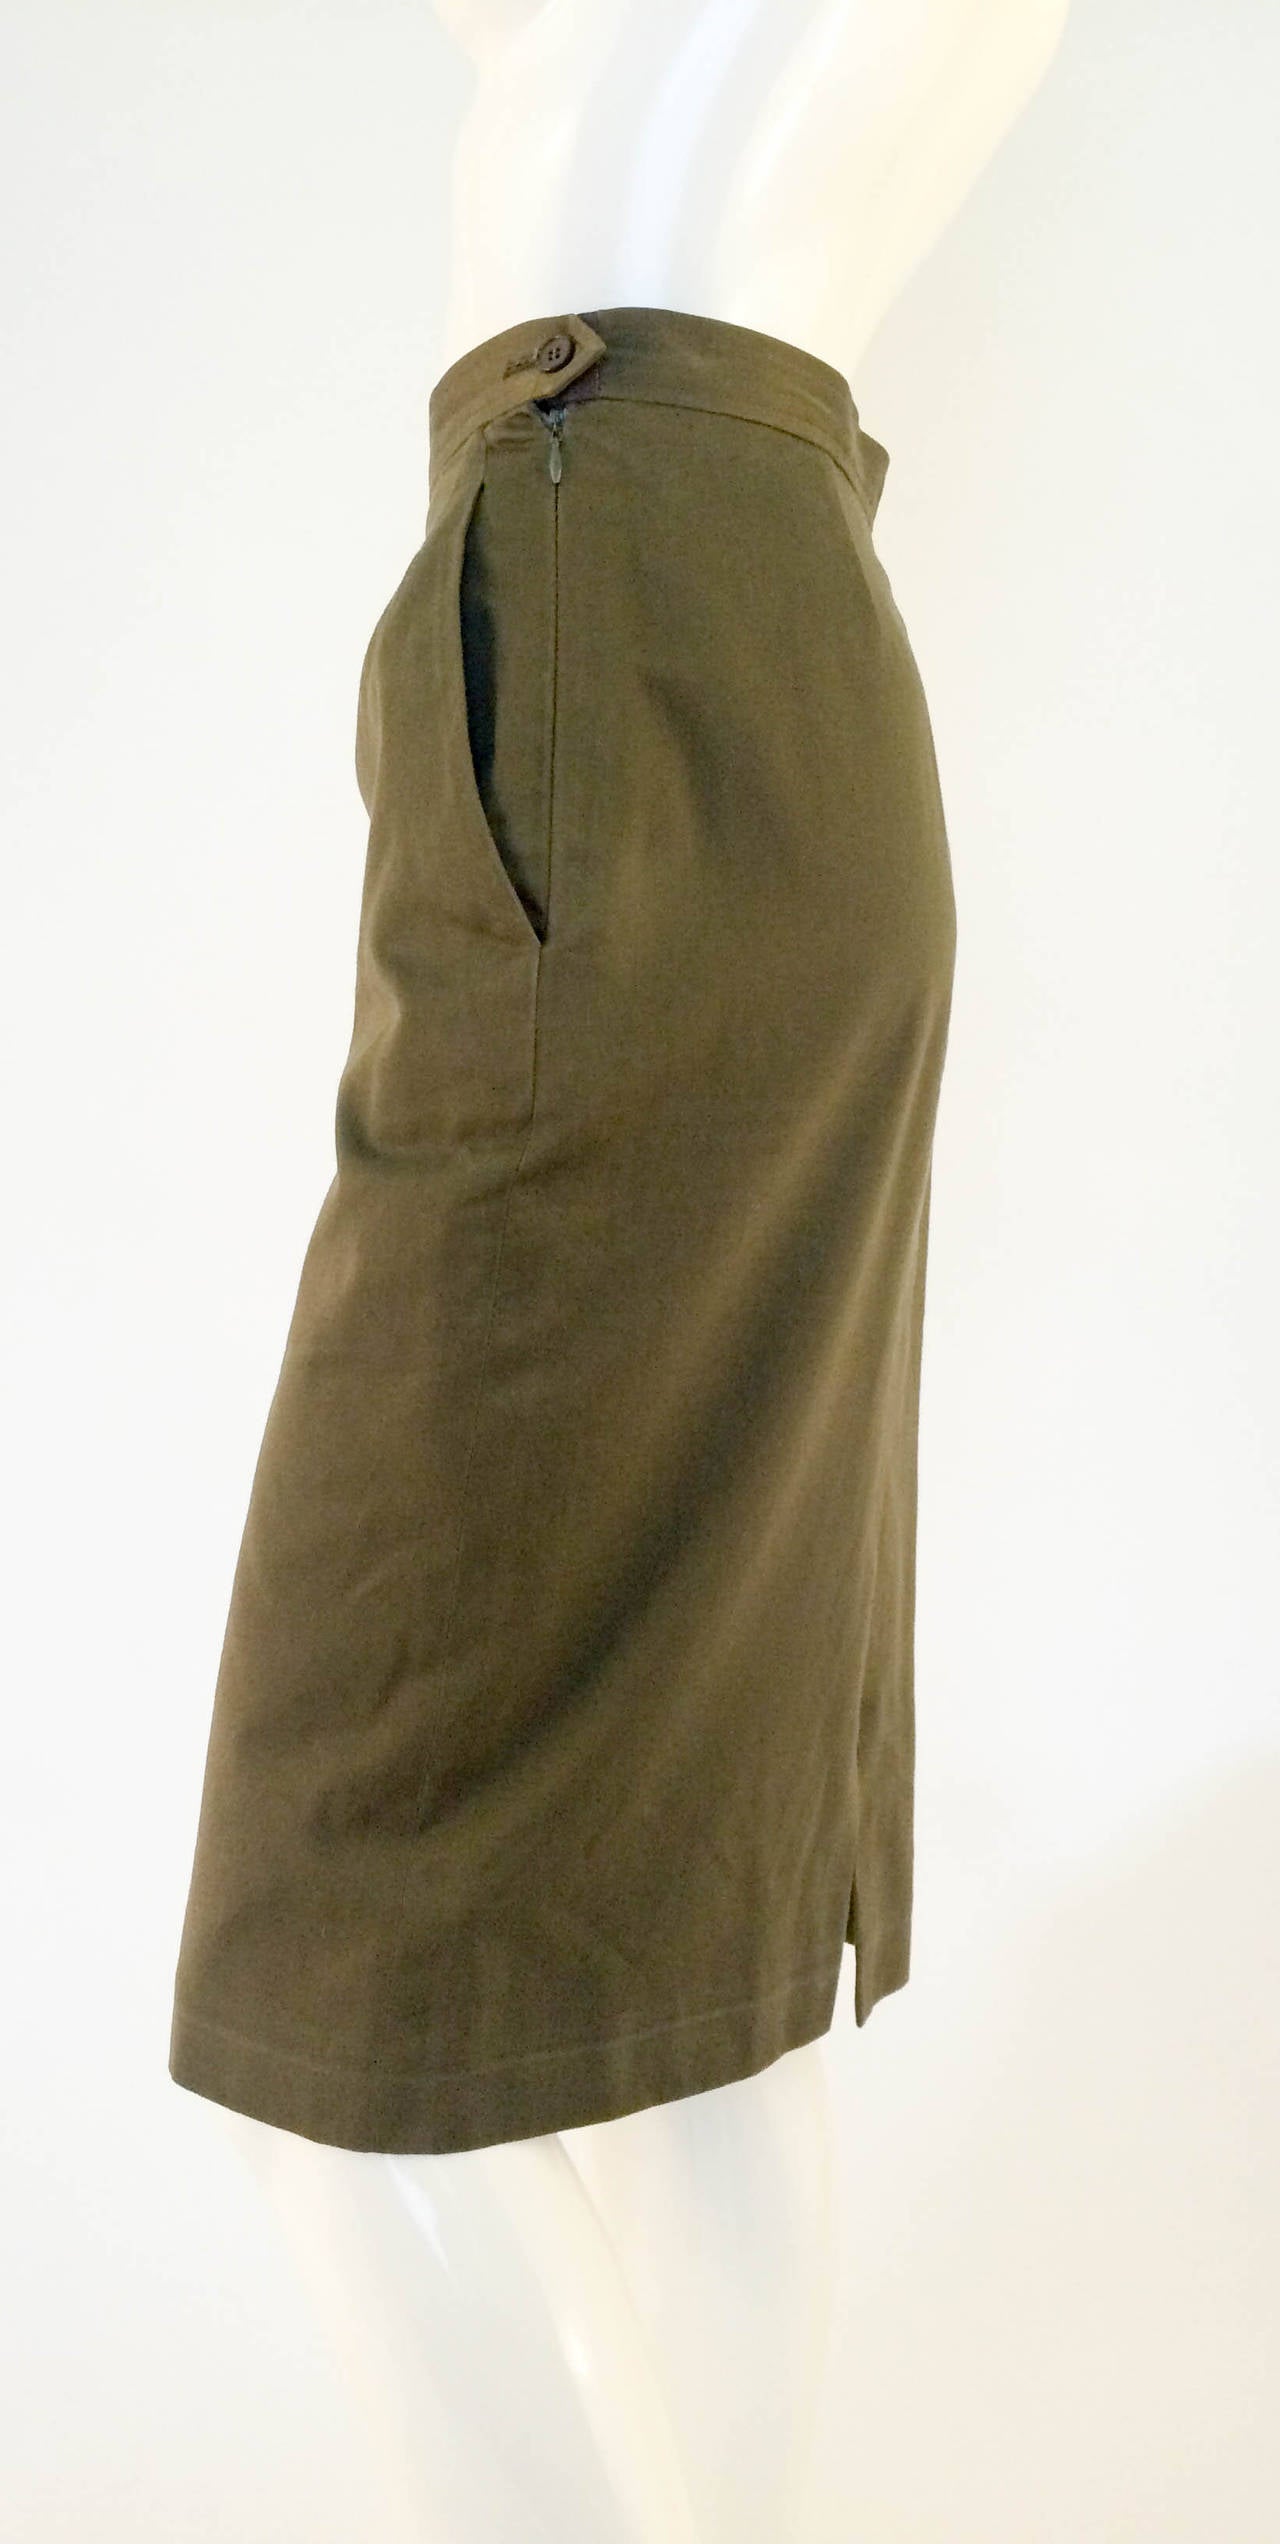 Stylish and Practical Yves Saint Laurent Rive Gauche Cotton Skirt. Late 80's, maybe early 90s. Military green cotton. Side pockets. The cut is straight down from the hips. Iconic and functional design. Made in France. Dry cleaned.

Condition: